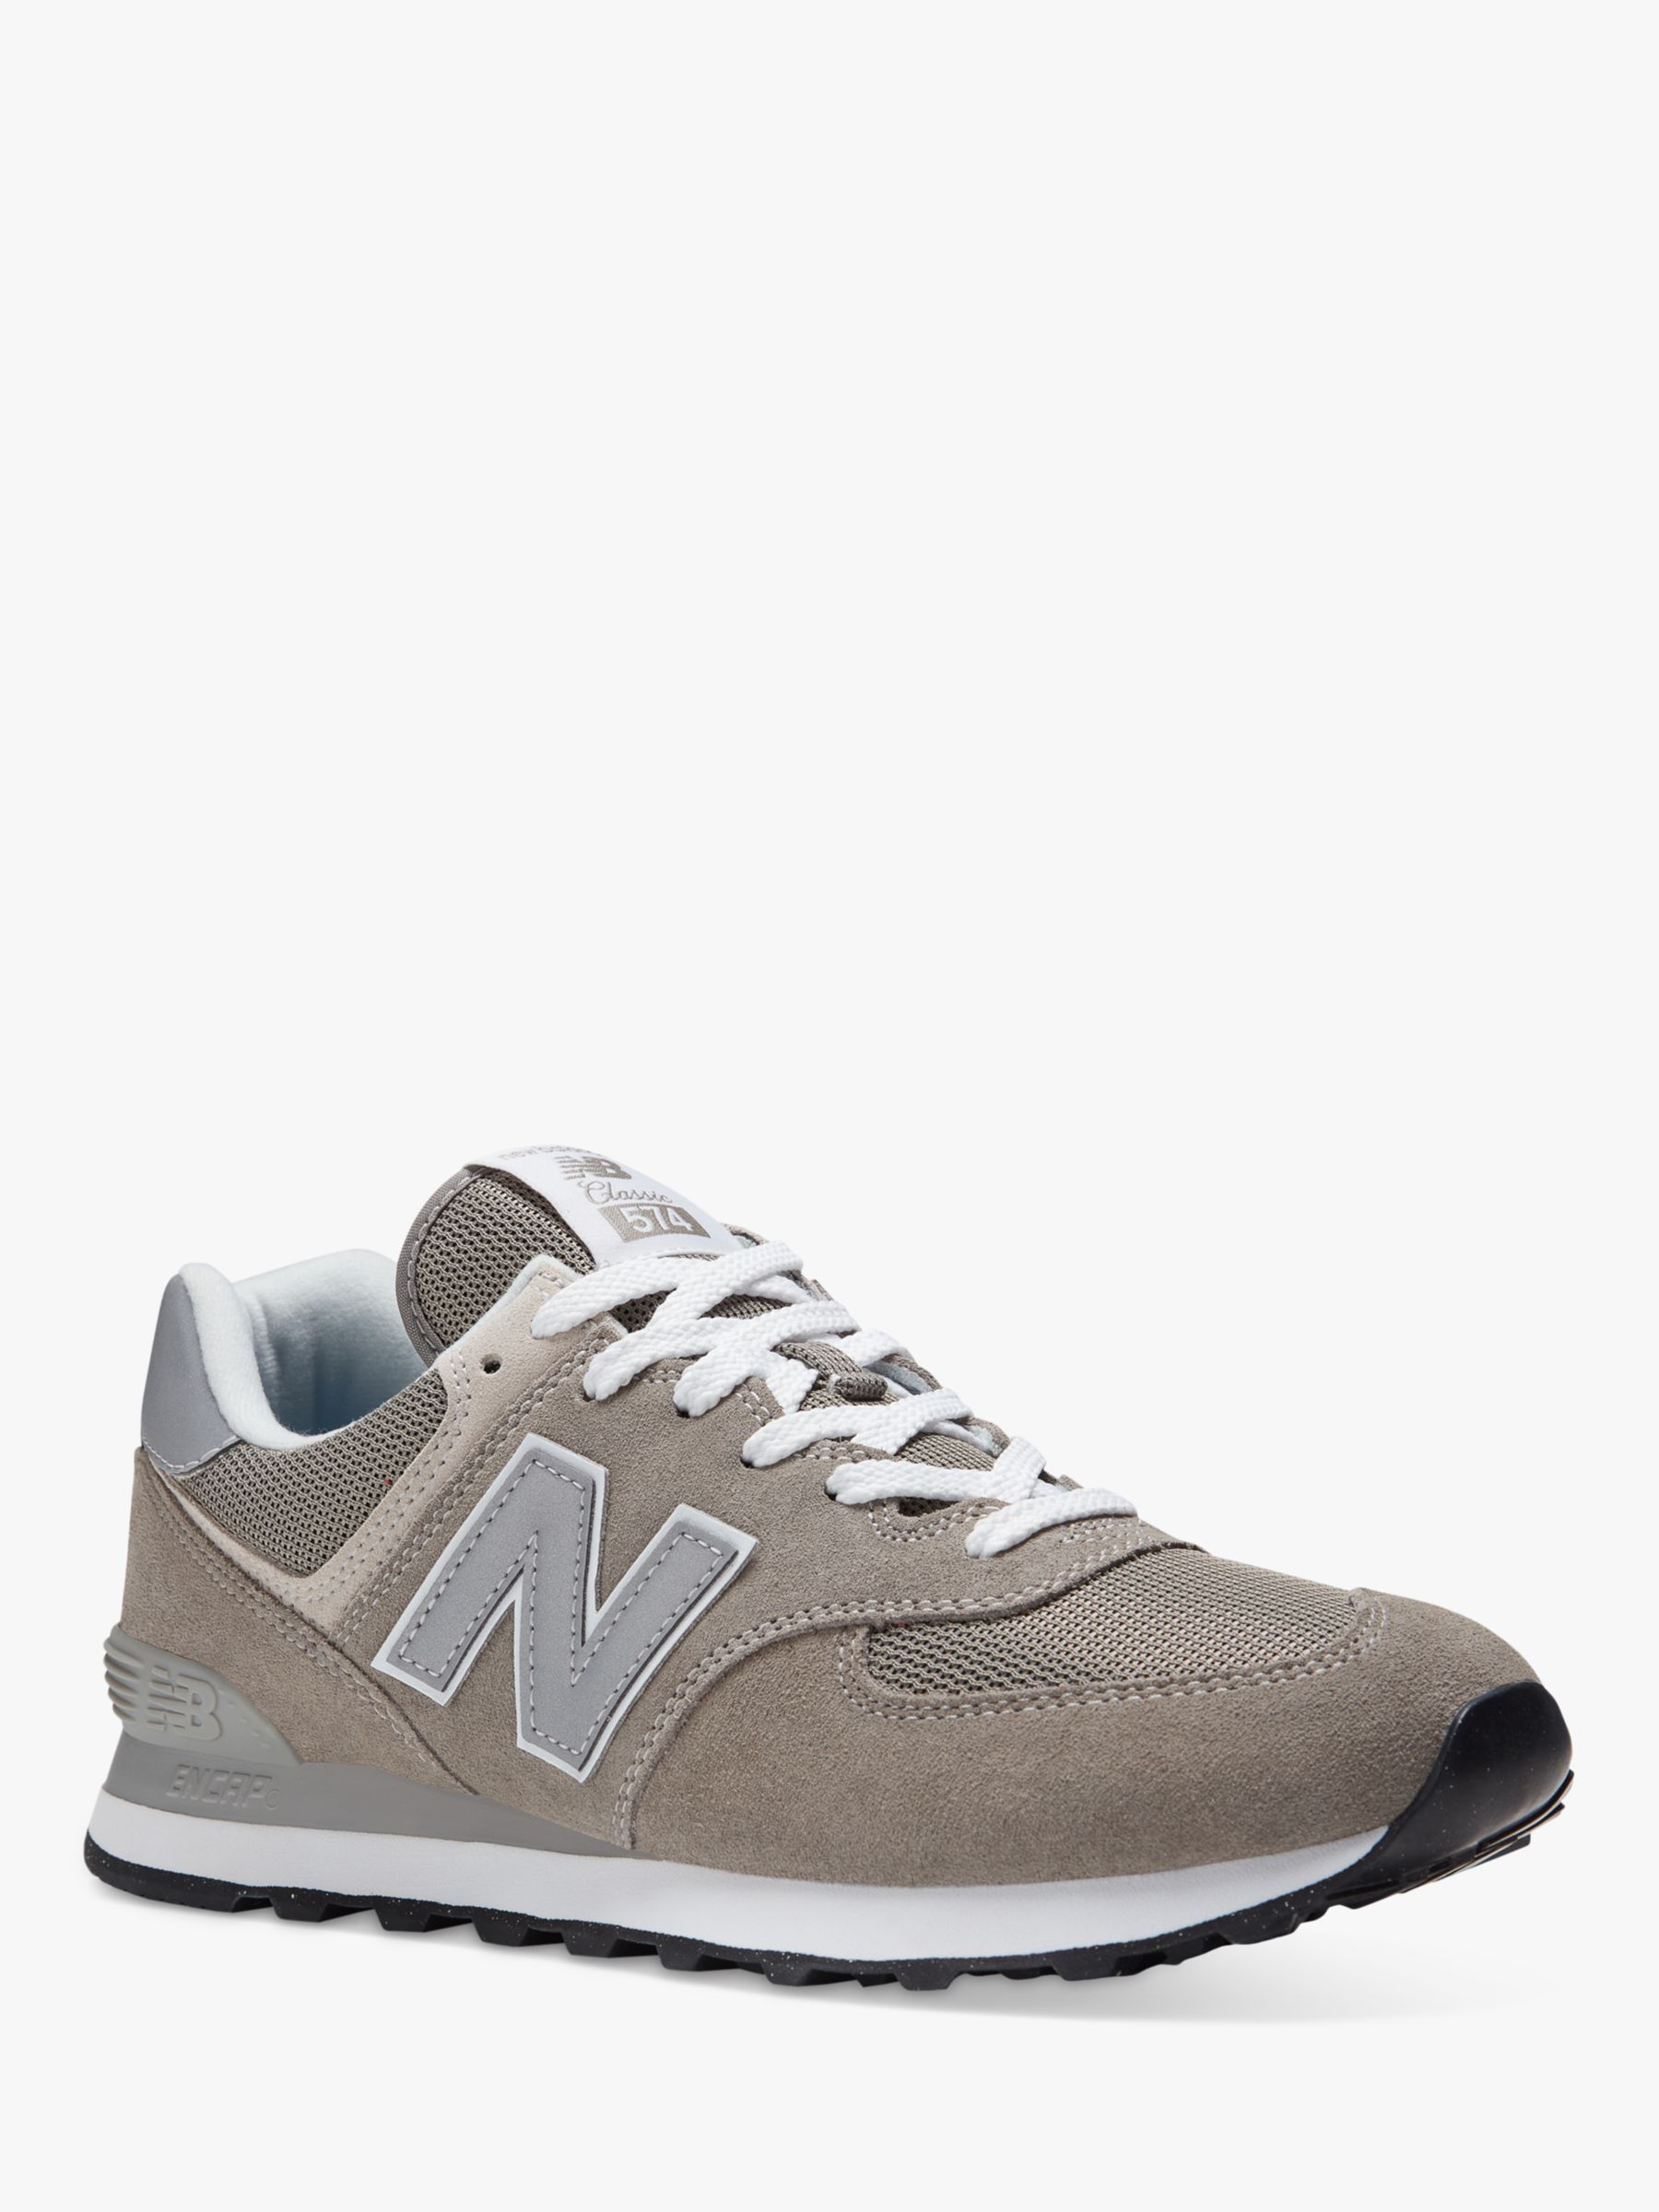 New Balance 574 Suede Trainers, Grey/White at John Lewis & Partners